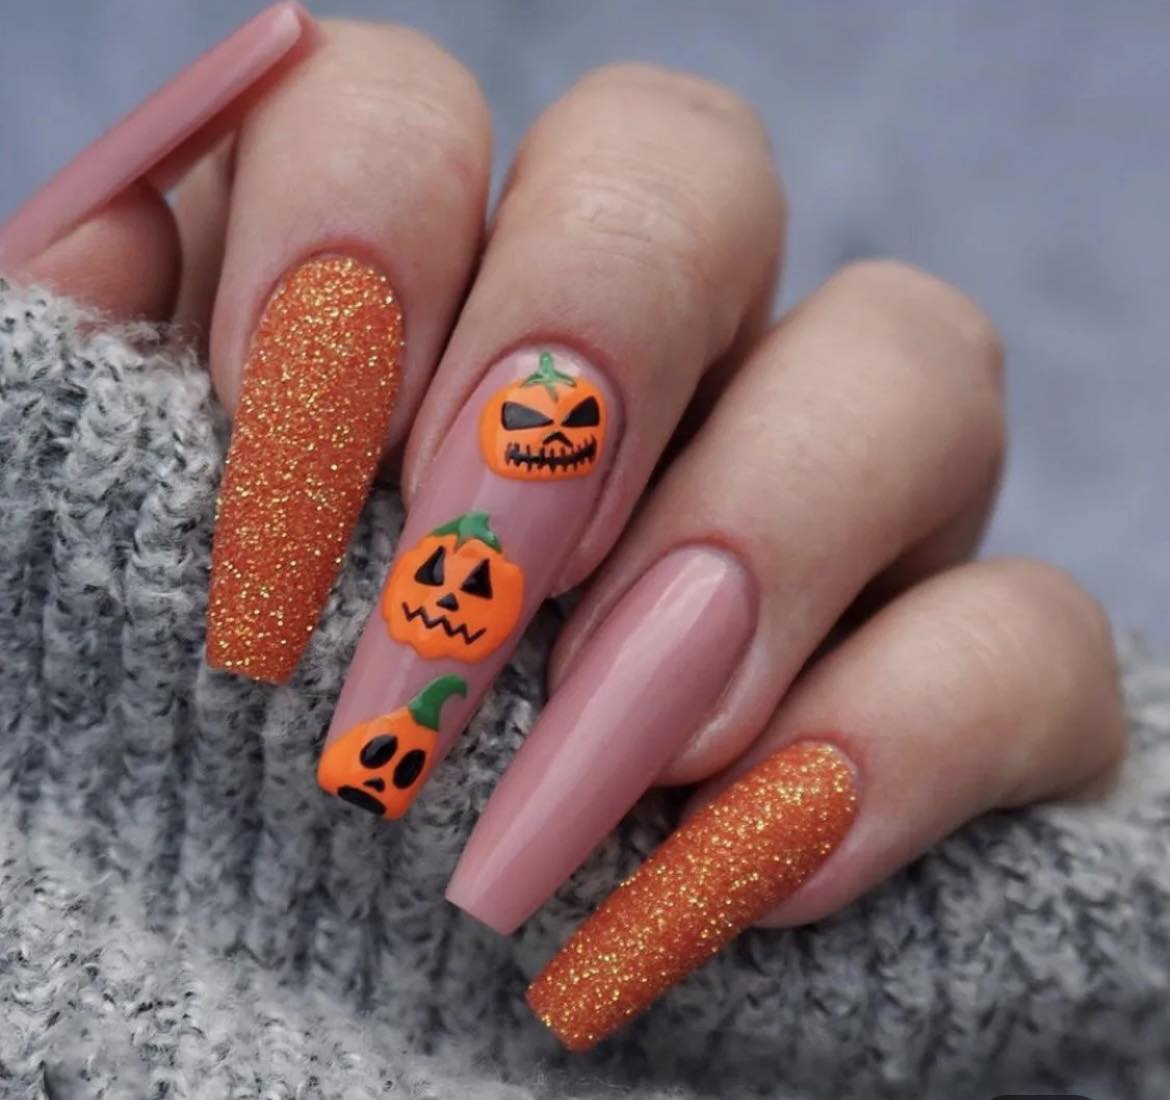 Halloween - Orange with Glitter & Peach with Pumpkins. Press on Nails. Long Coffin Style.